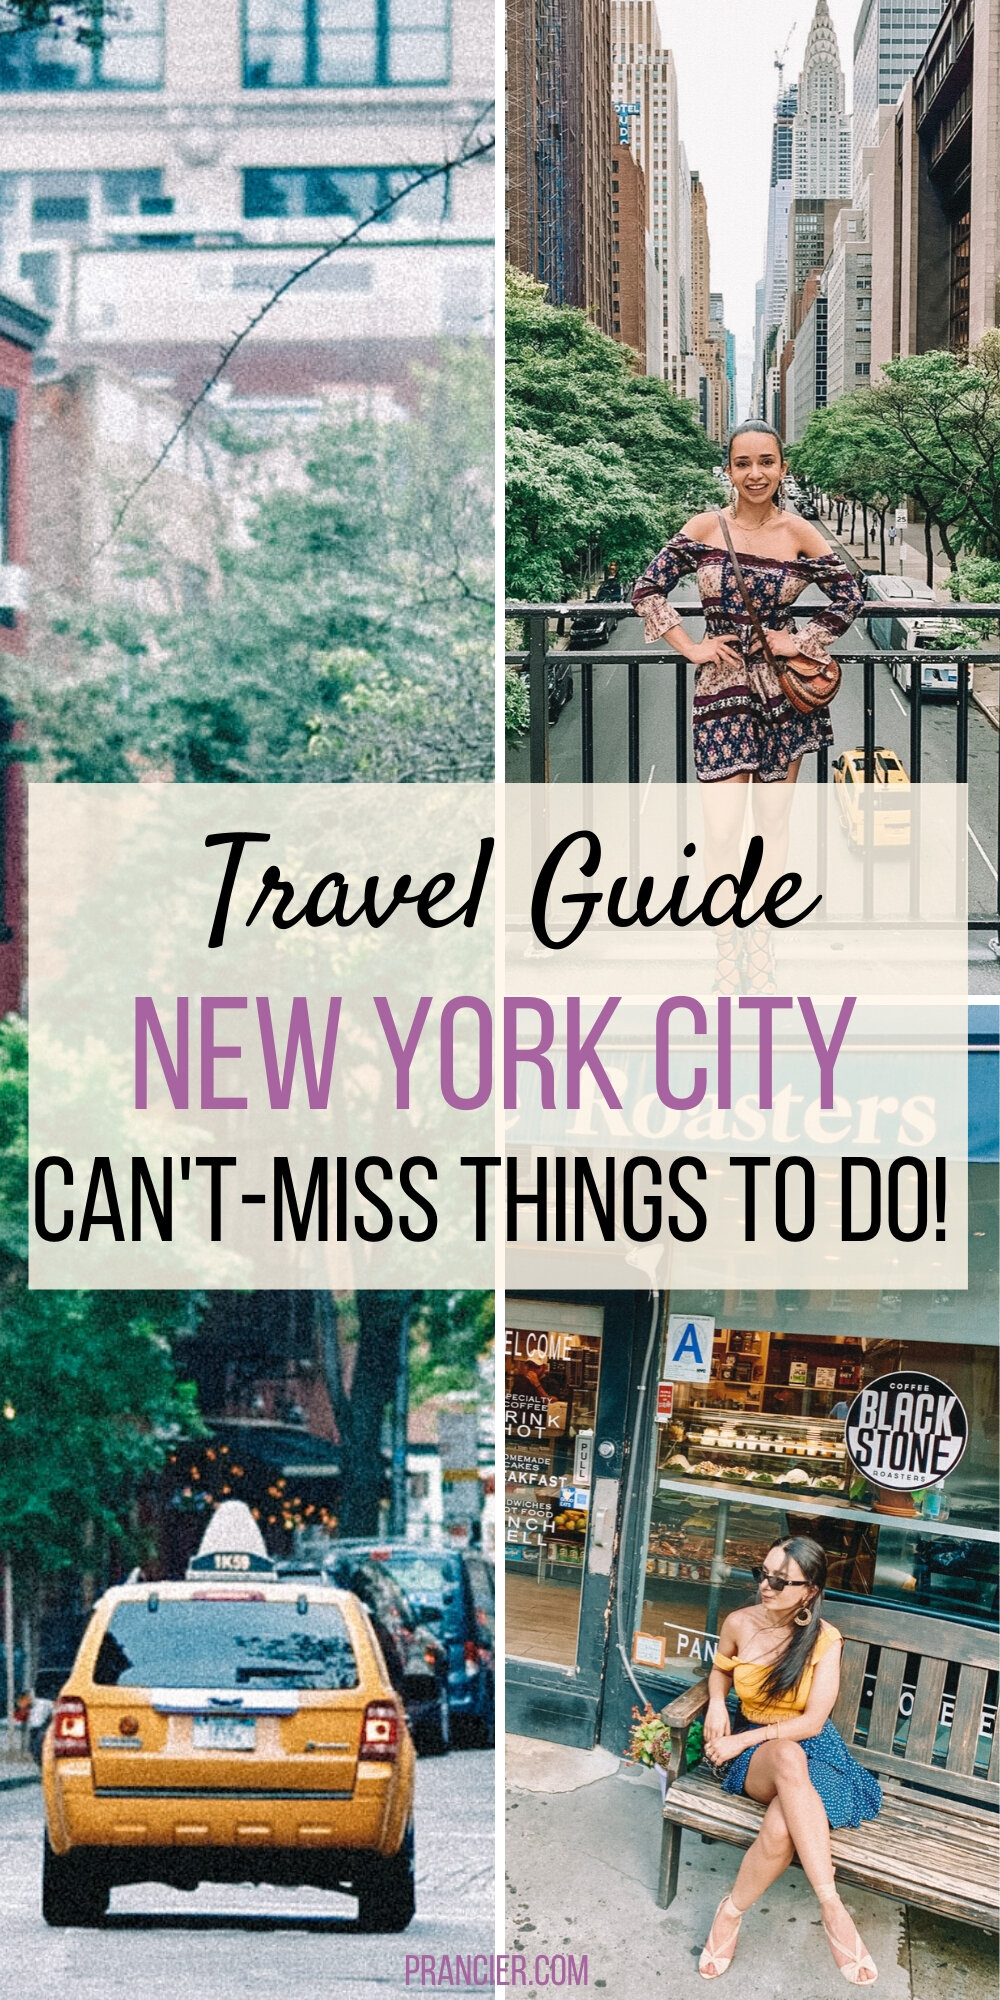 New York City Guide  Restaurants, hotels & things to do